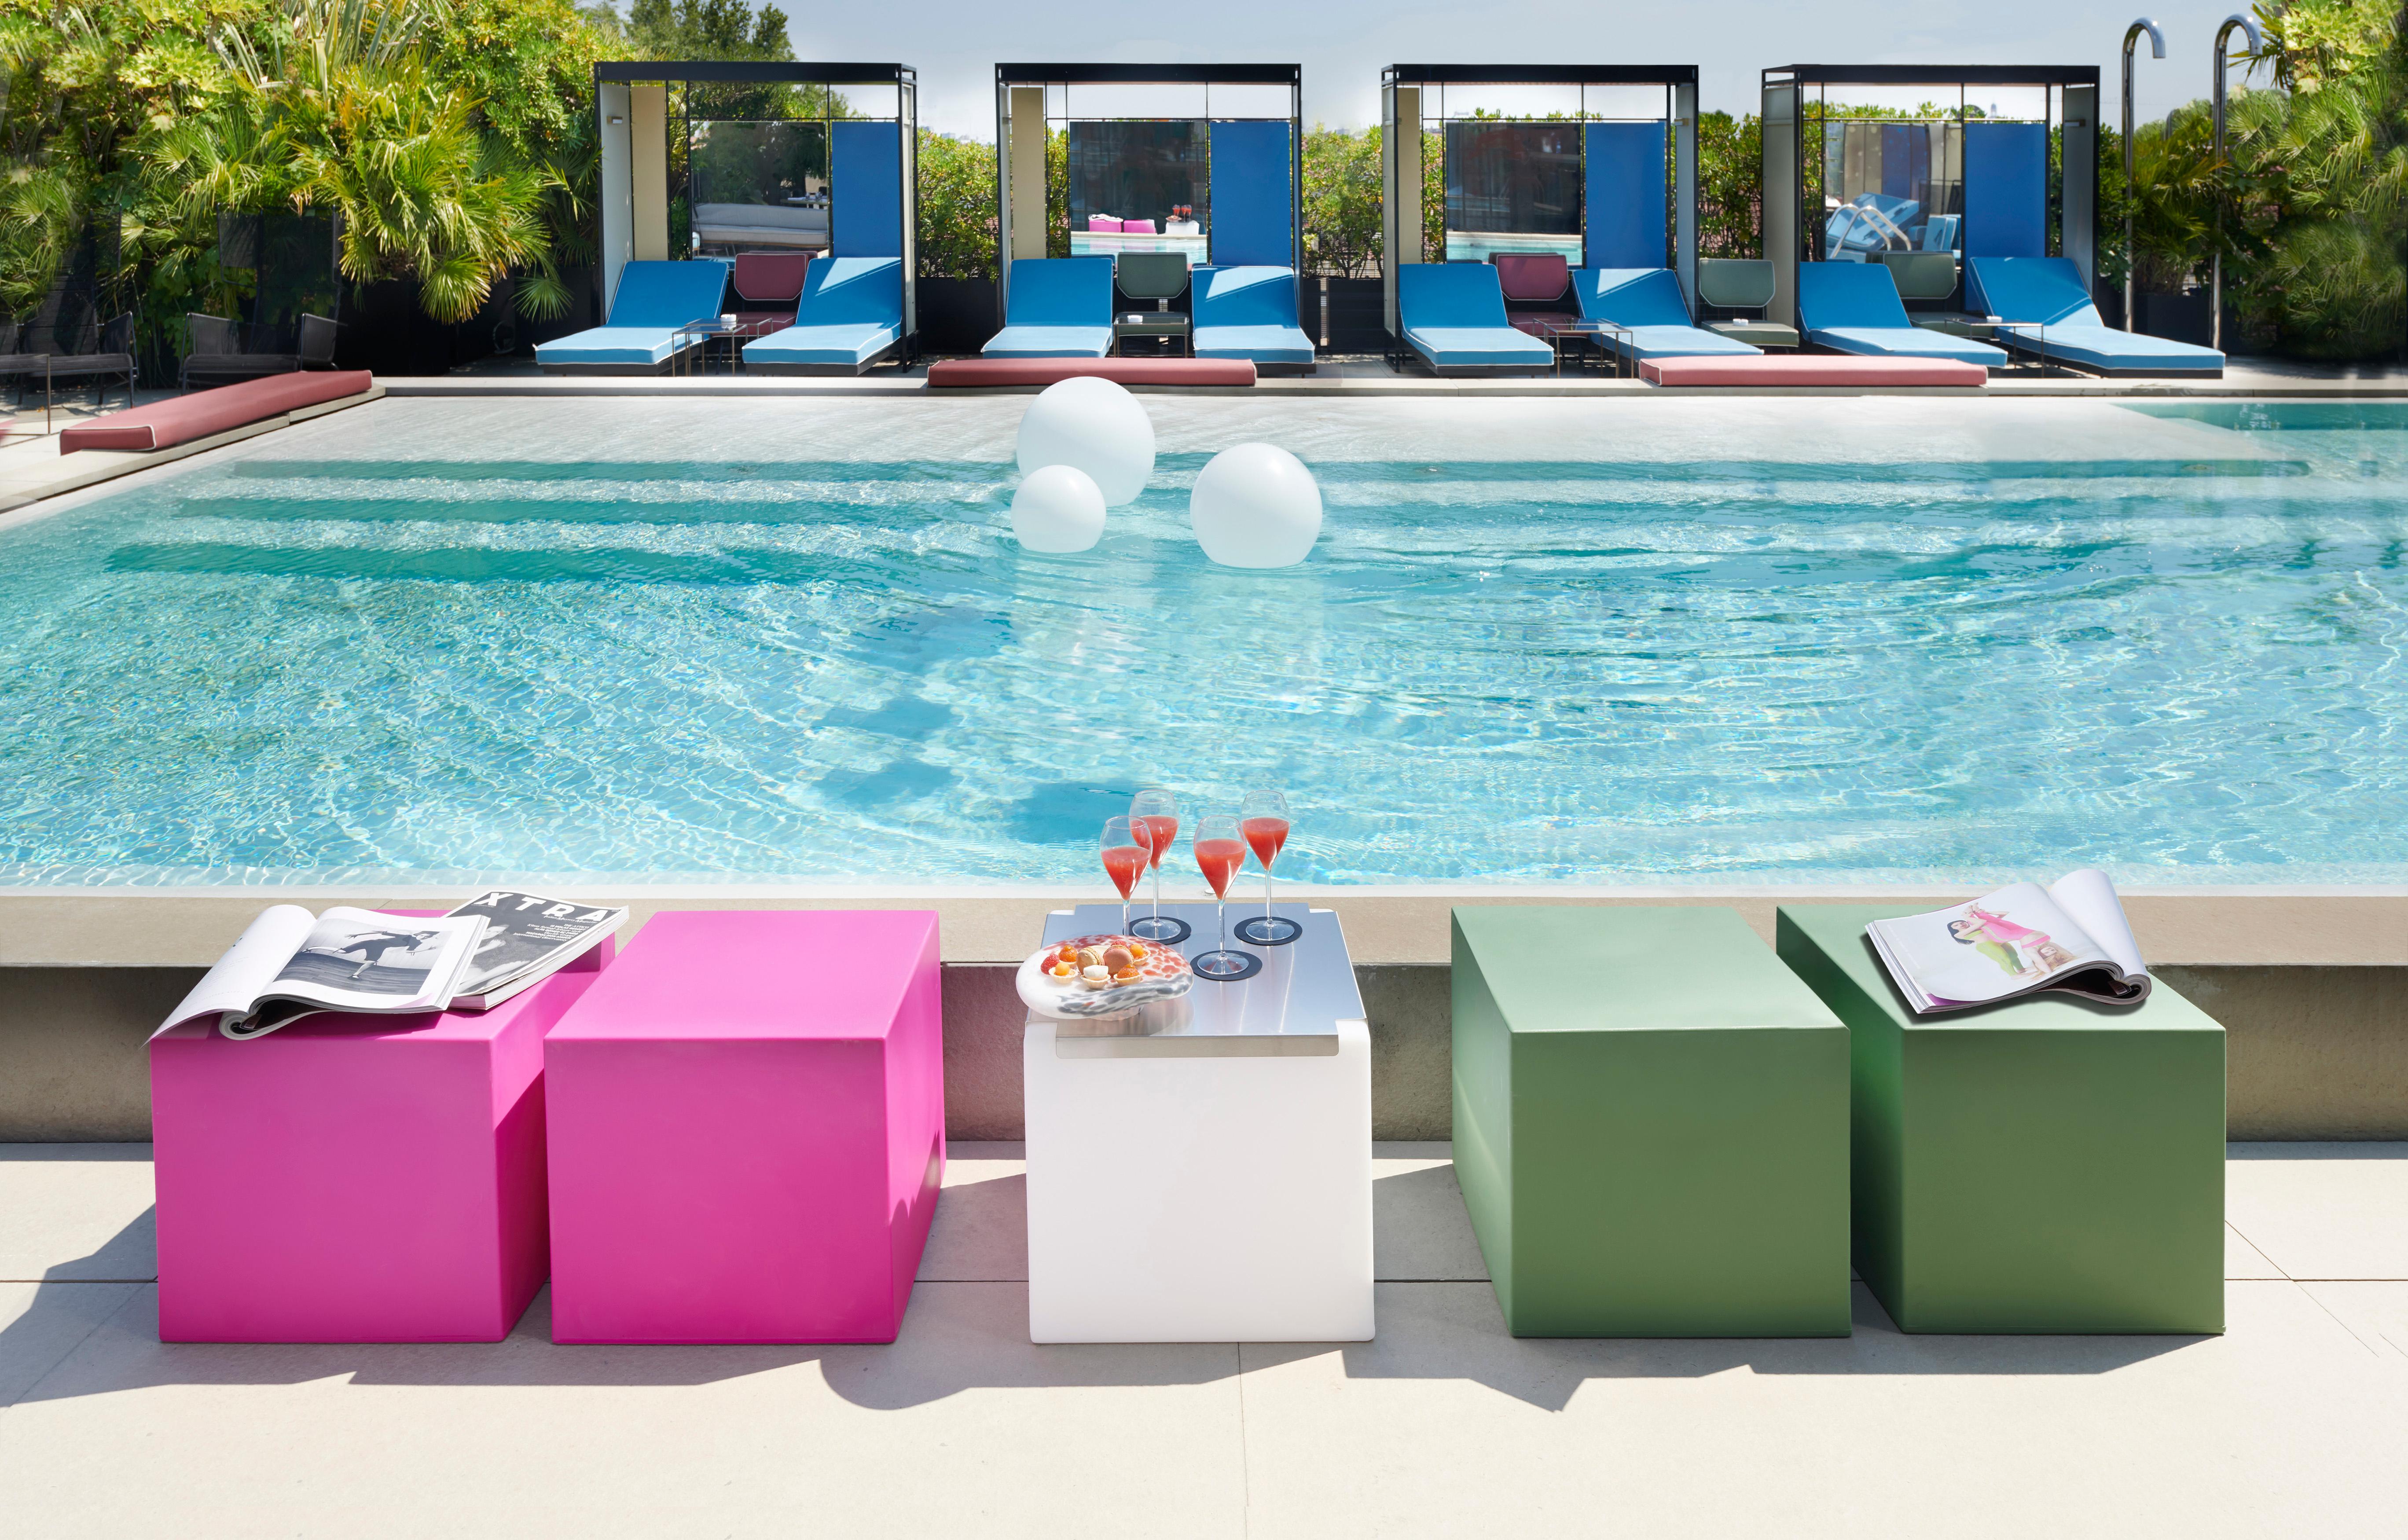 Malva Green Cubo Pouf Stool by SLIDE Studio
Dimensions: D 43 x W 43 x H 43 cm. 
Materials: Polyethylene.
Weight: 4 kg.

Available in different color options. This product is suitable for indoor and outdoor use. Available in different versions: